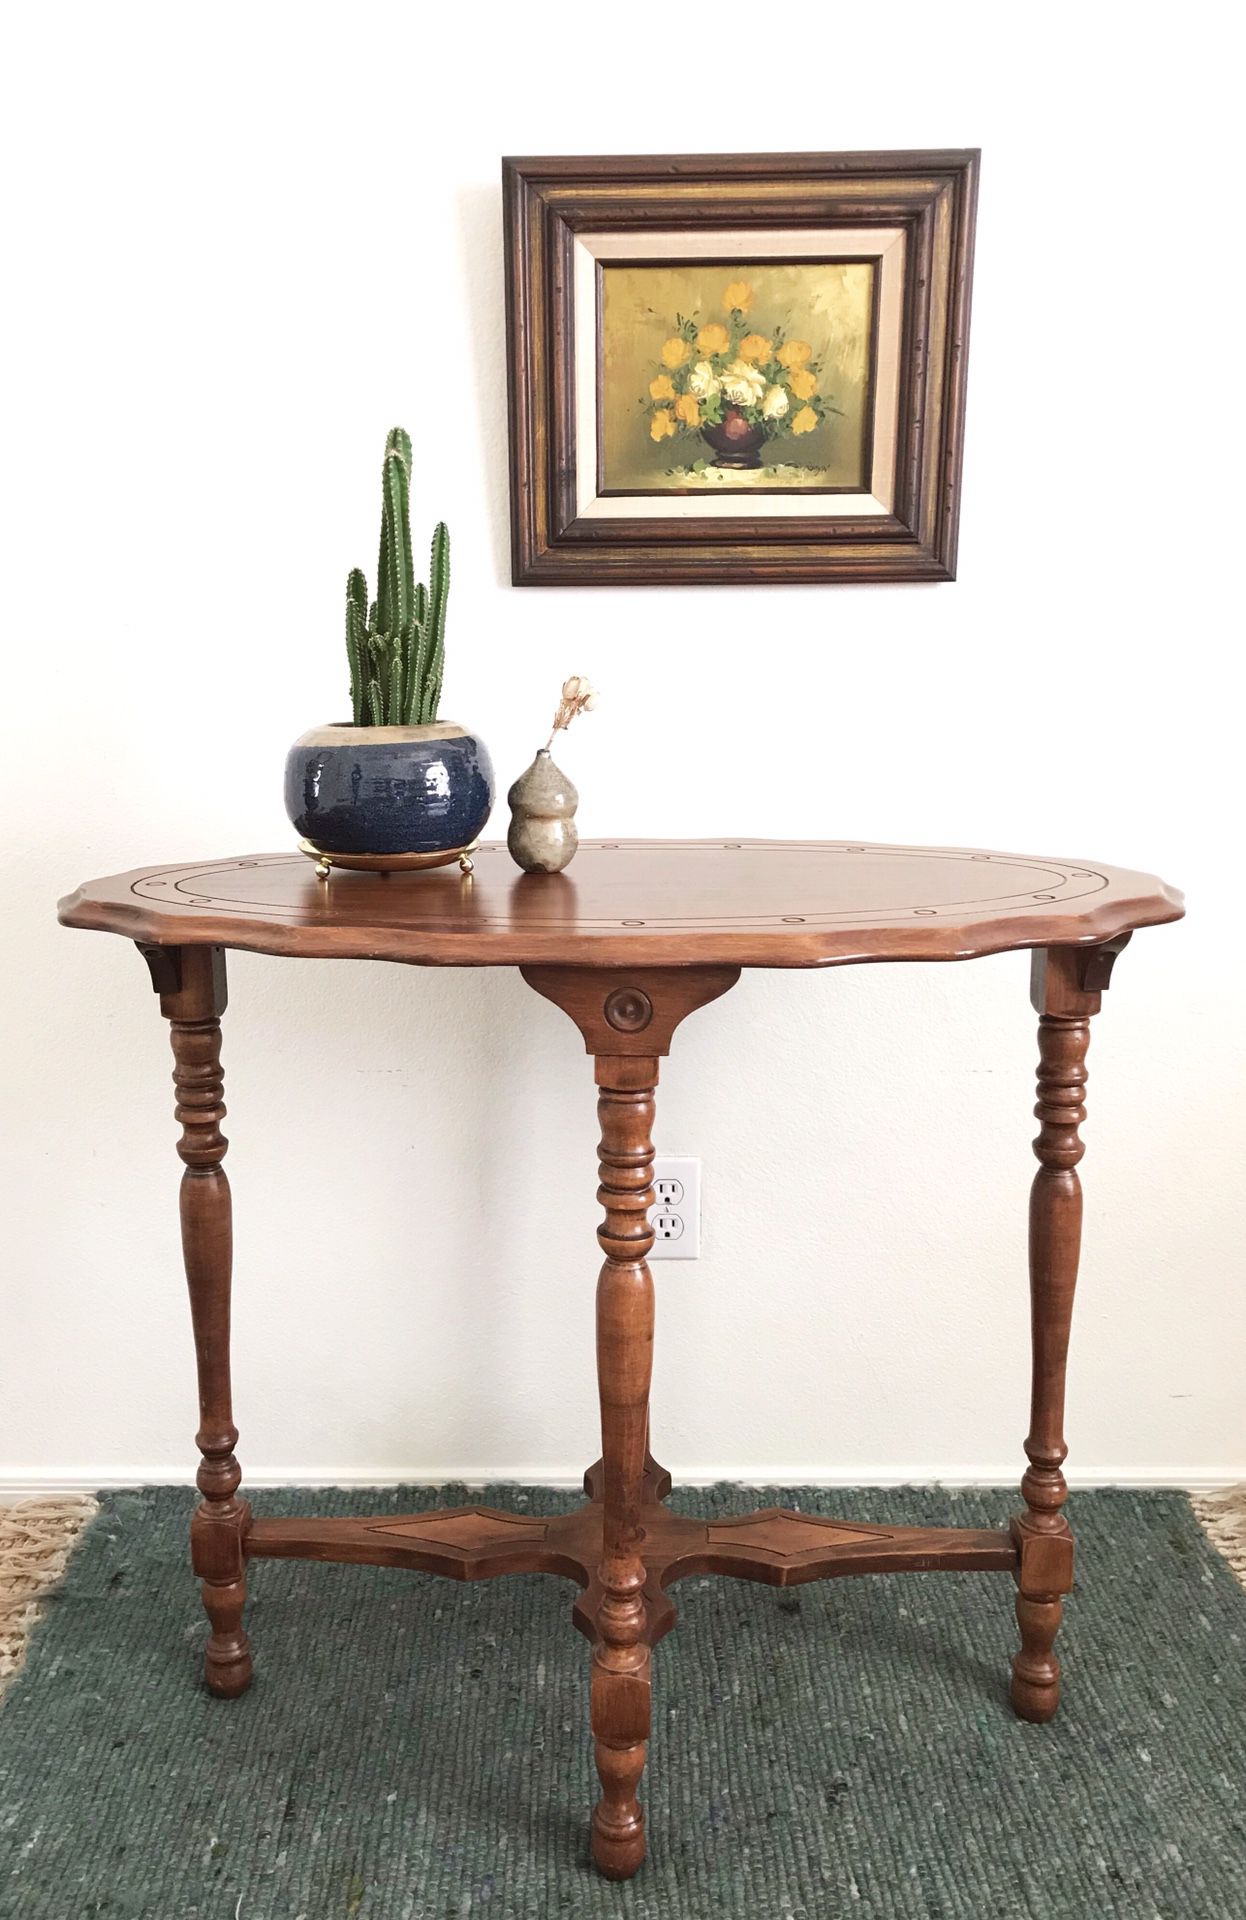 Vintage oval wood engraved console or entry table